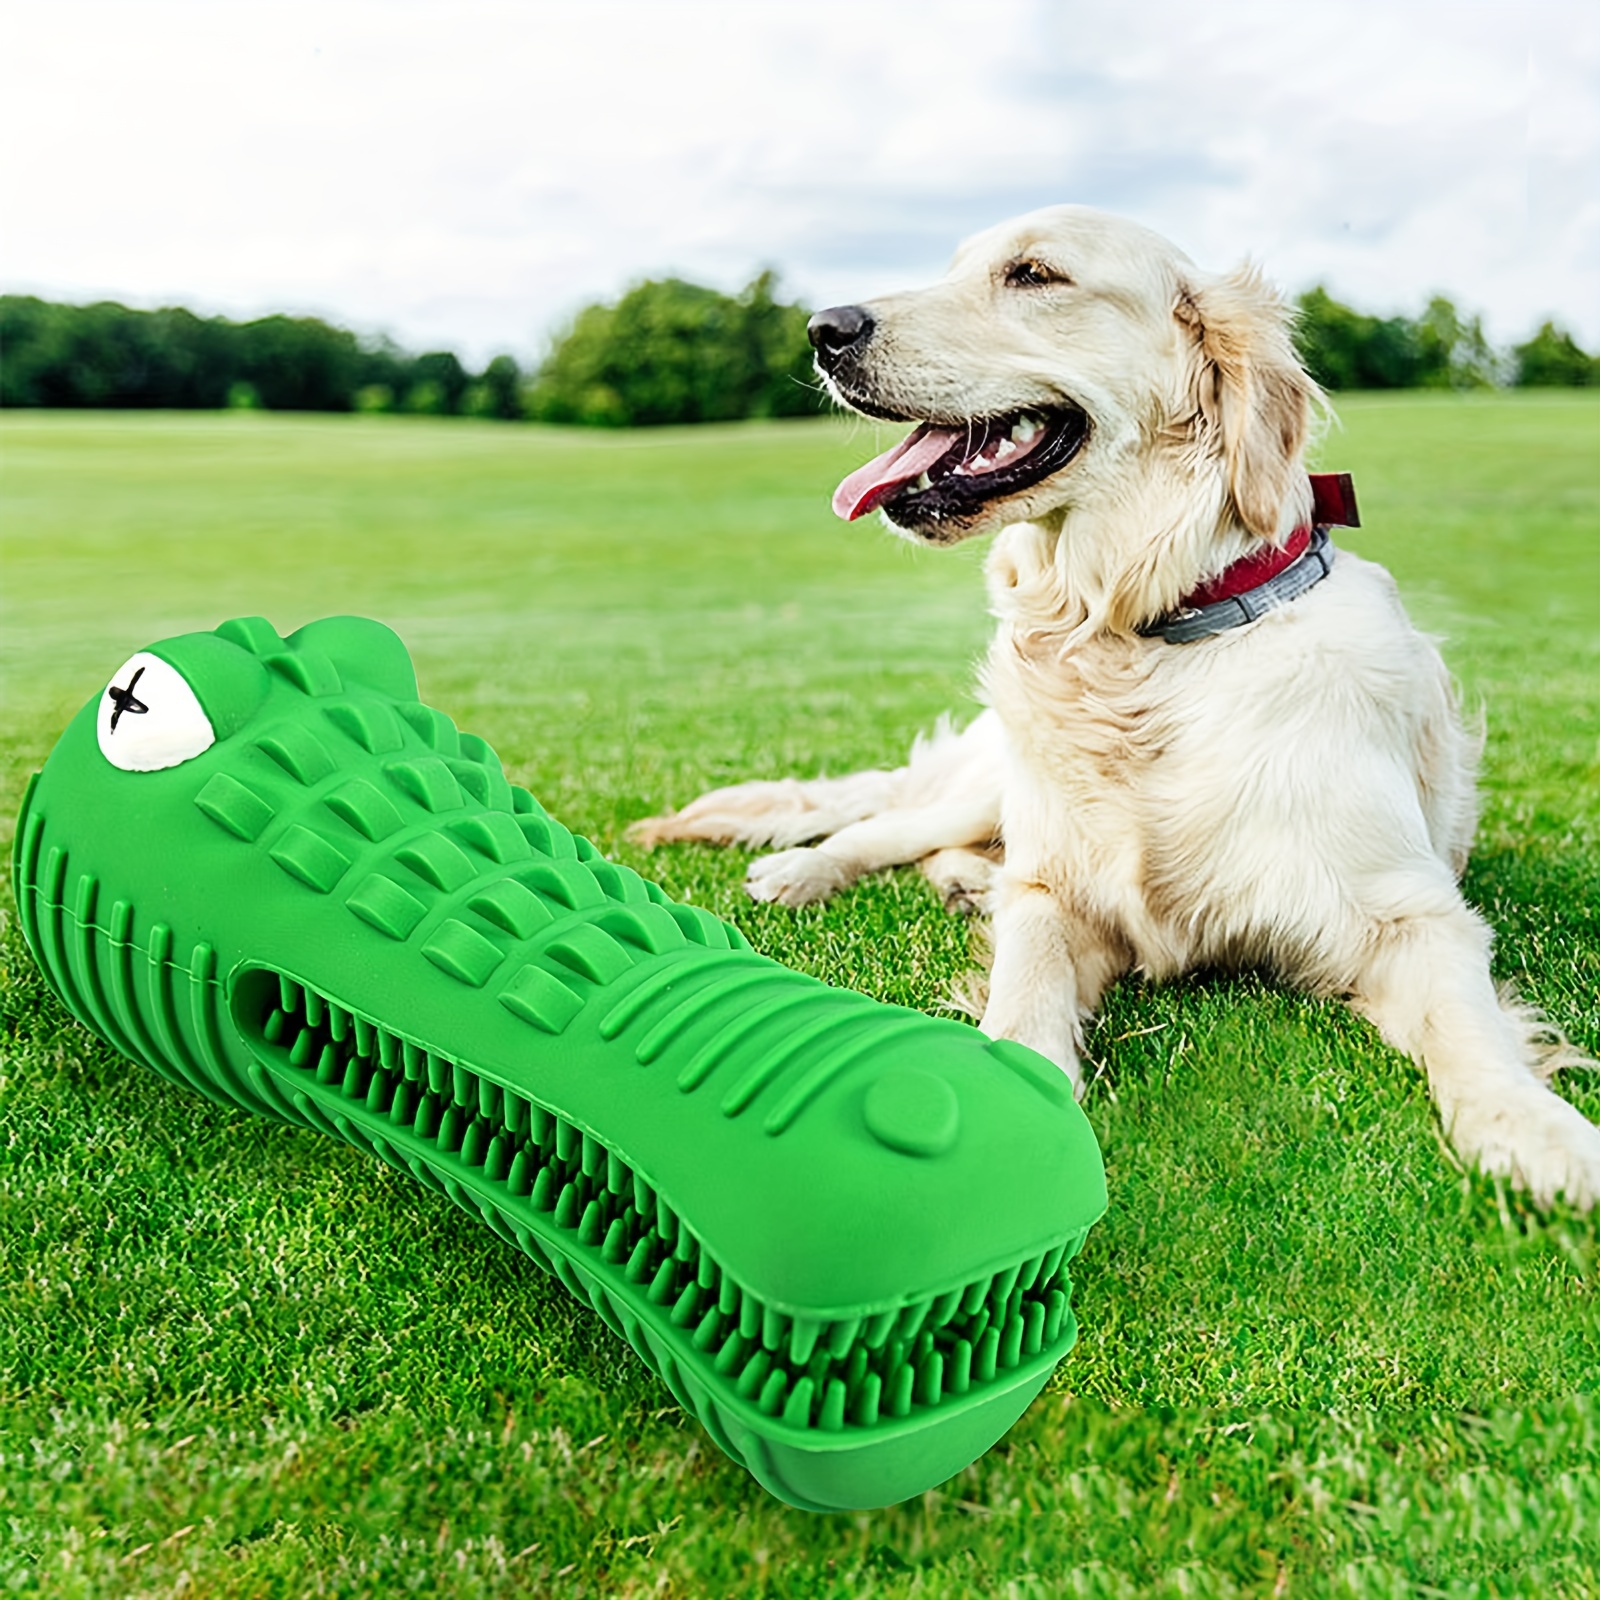 Teeth-cleaning Squeaky Interactive Dog Chew Toy